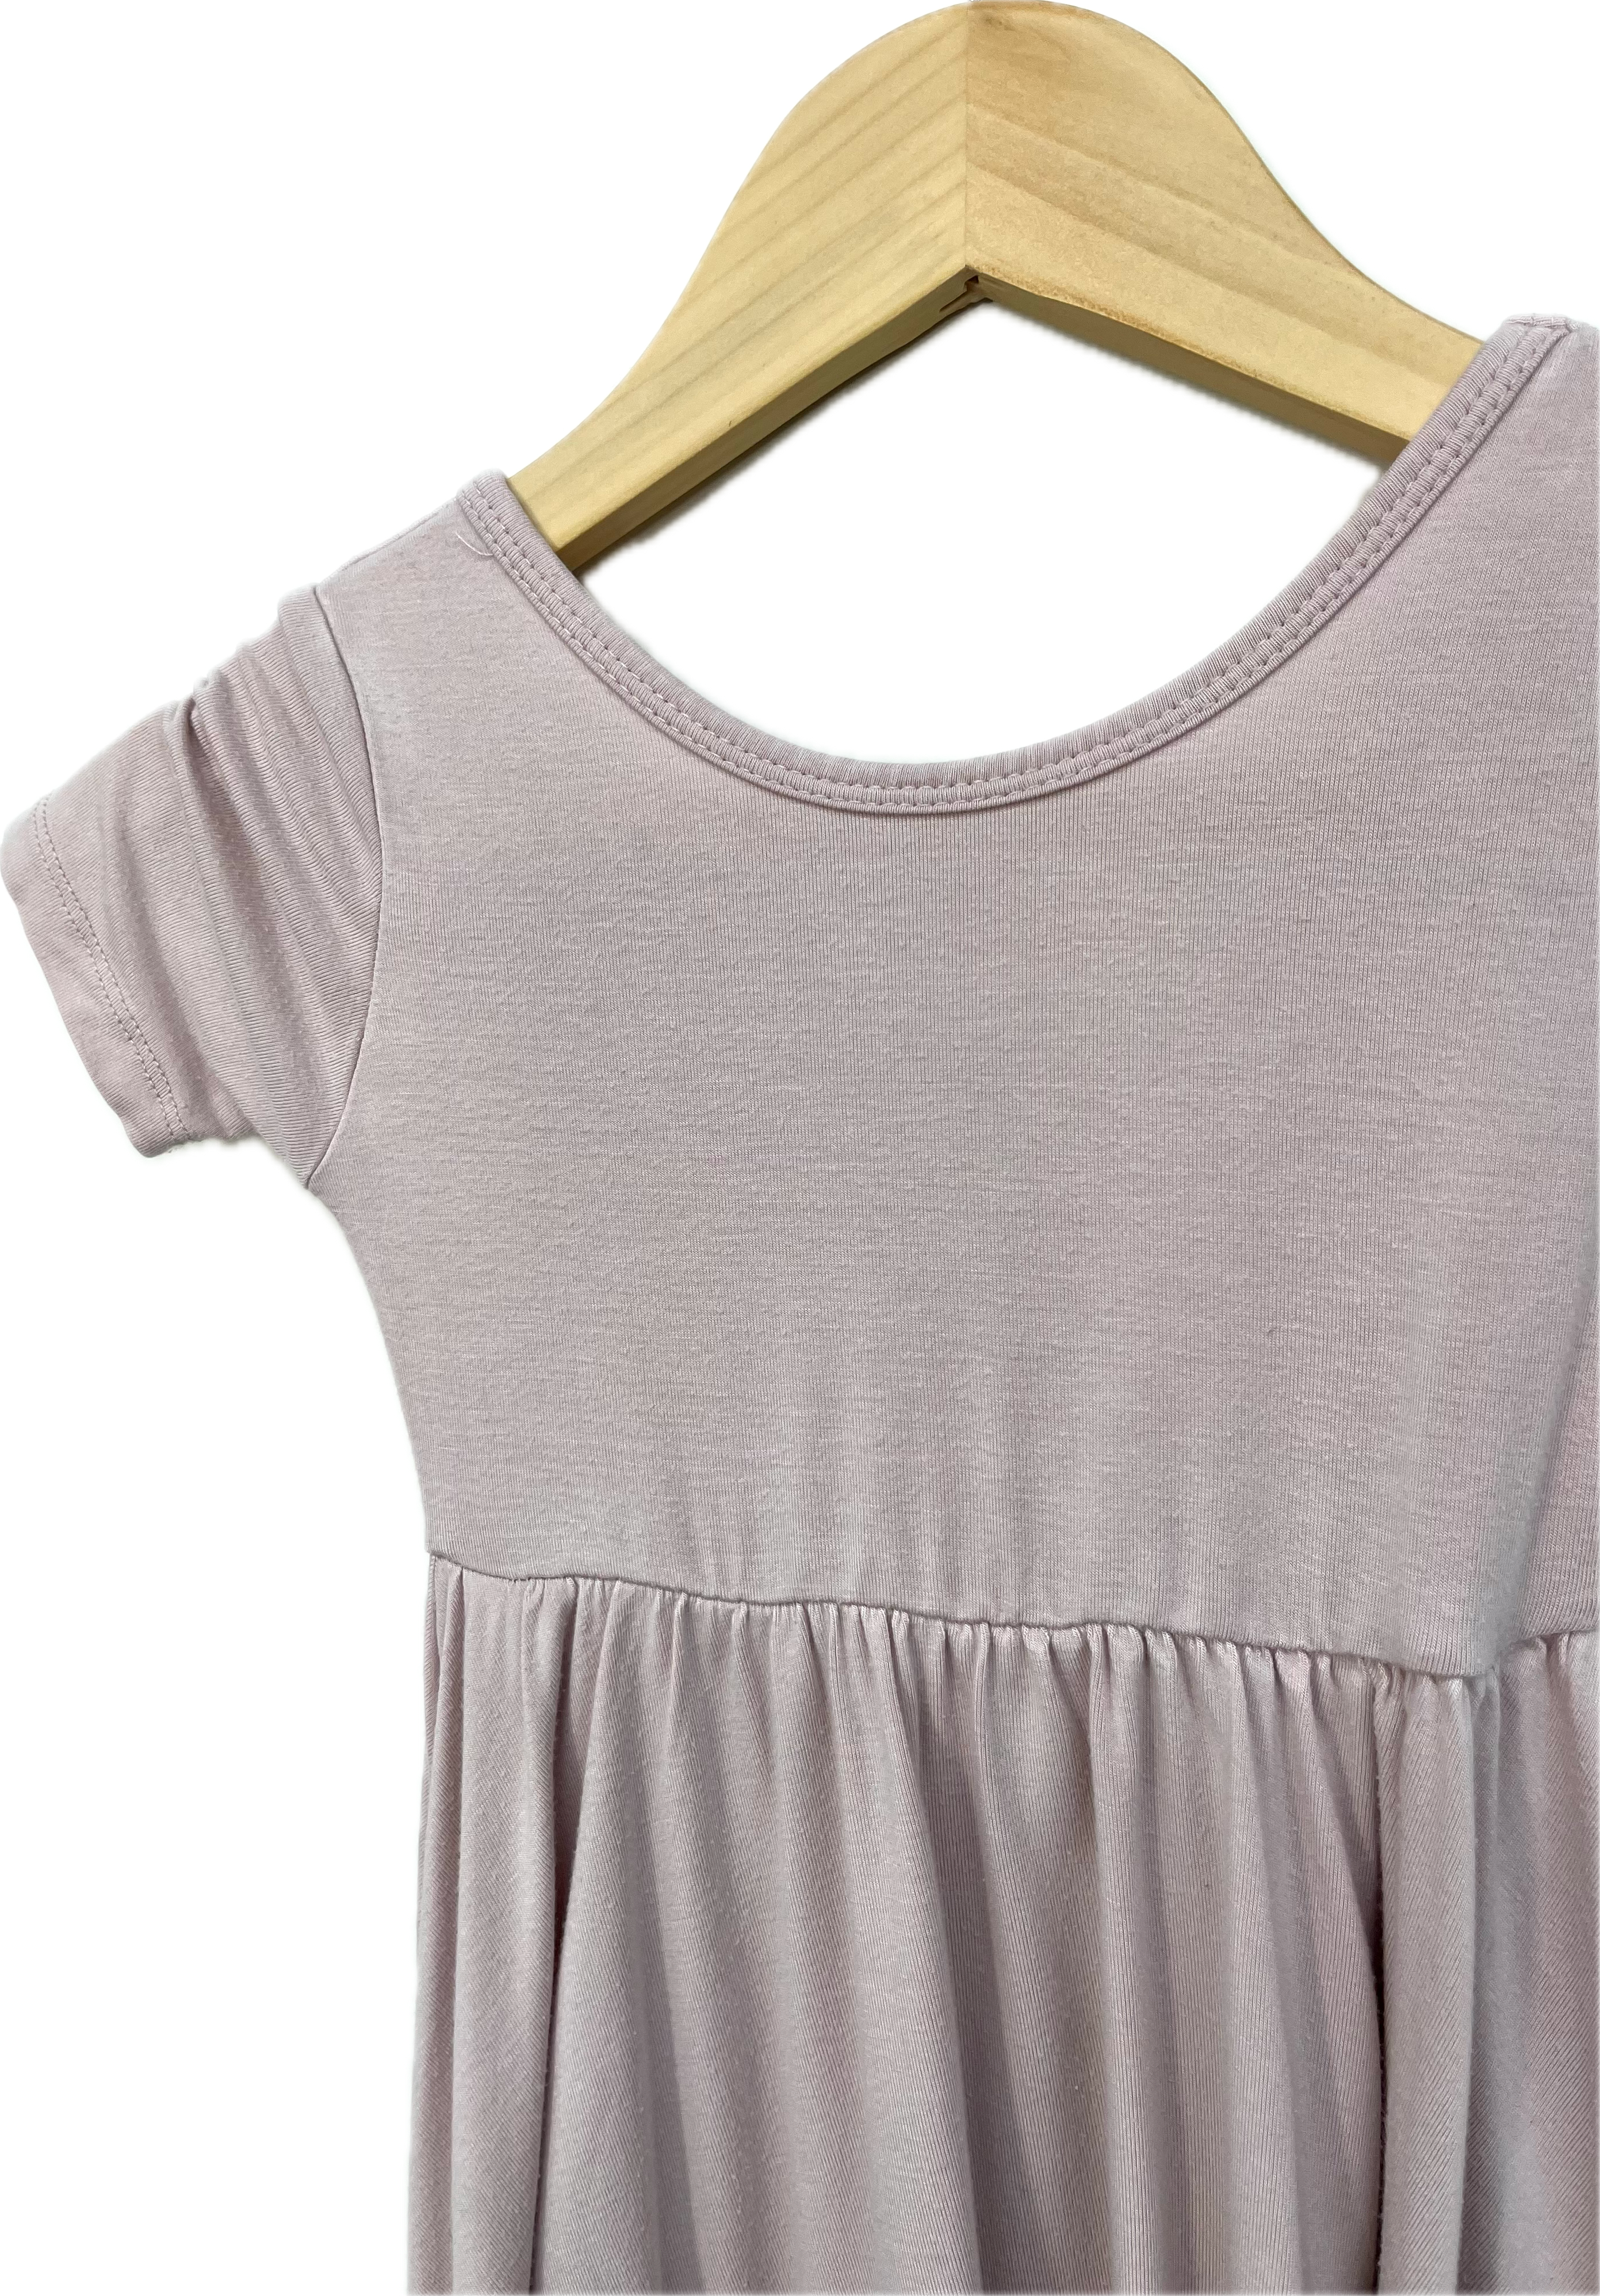 kyte twirl dress blush 2T (pilled, blue stain on front)